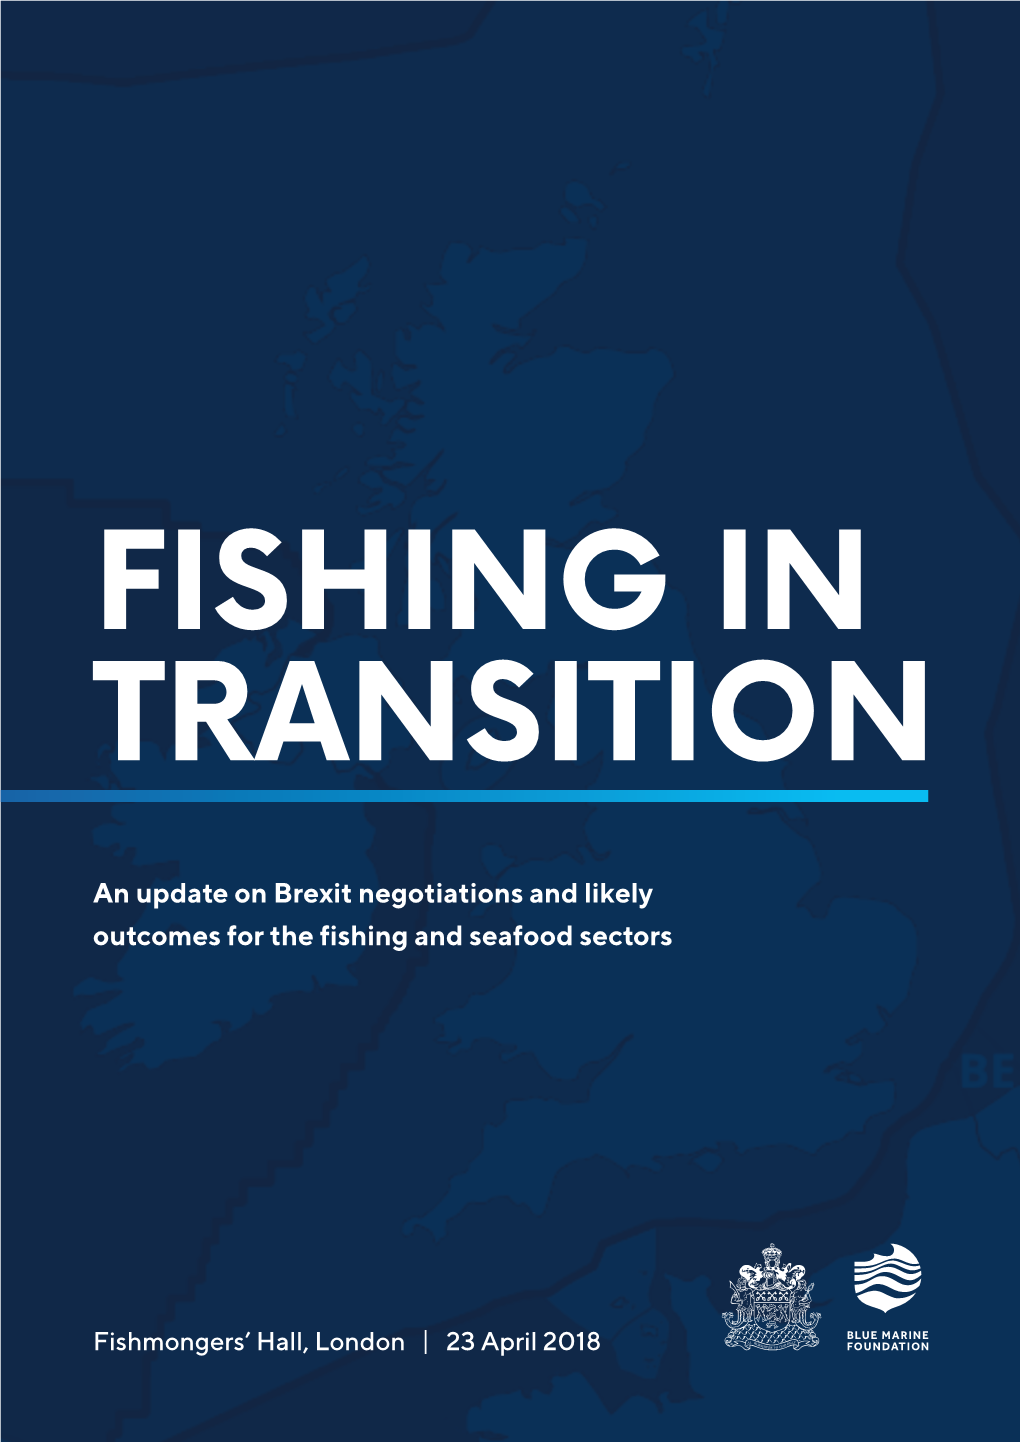 An Update on Brexit Negotiations and Likely Outcomes for the Fishing and Seafood Sectors